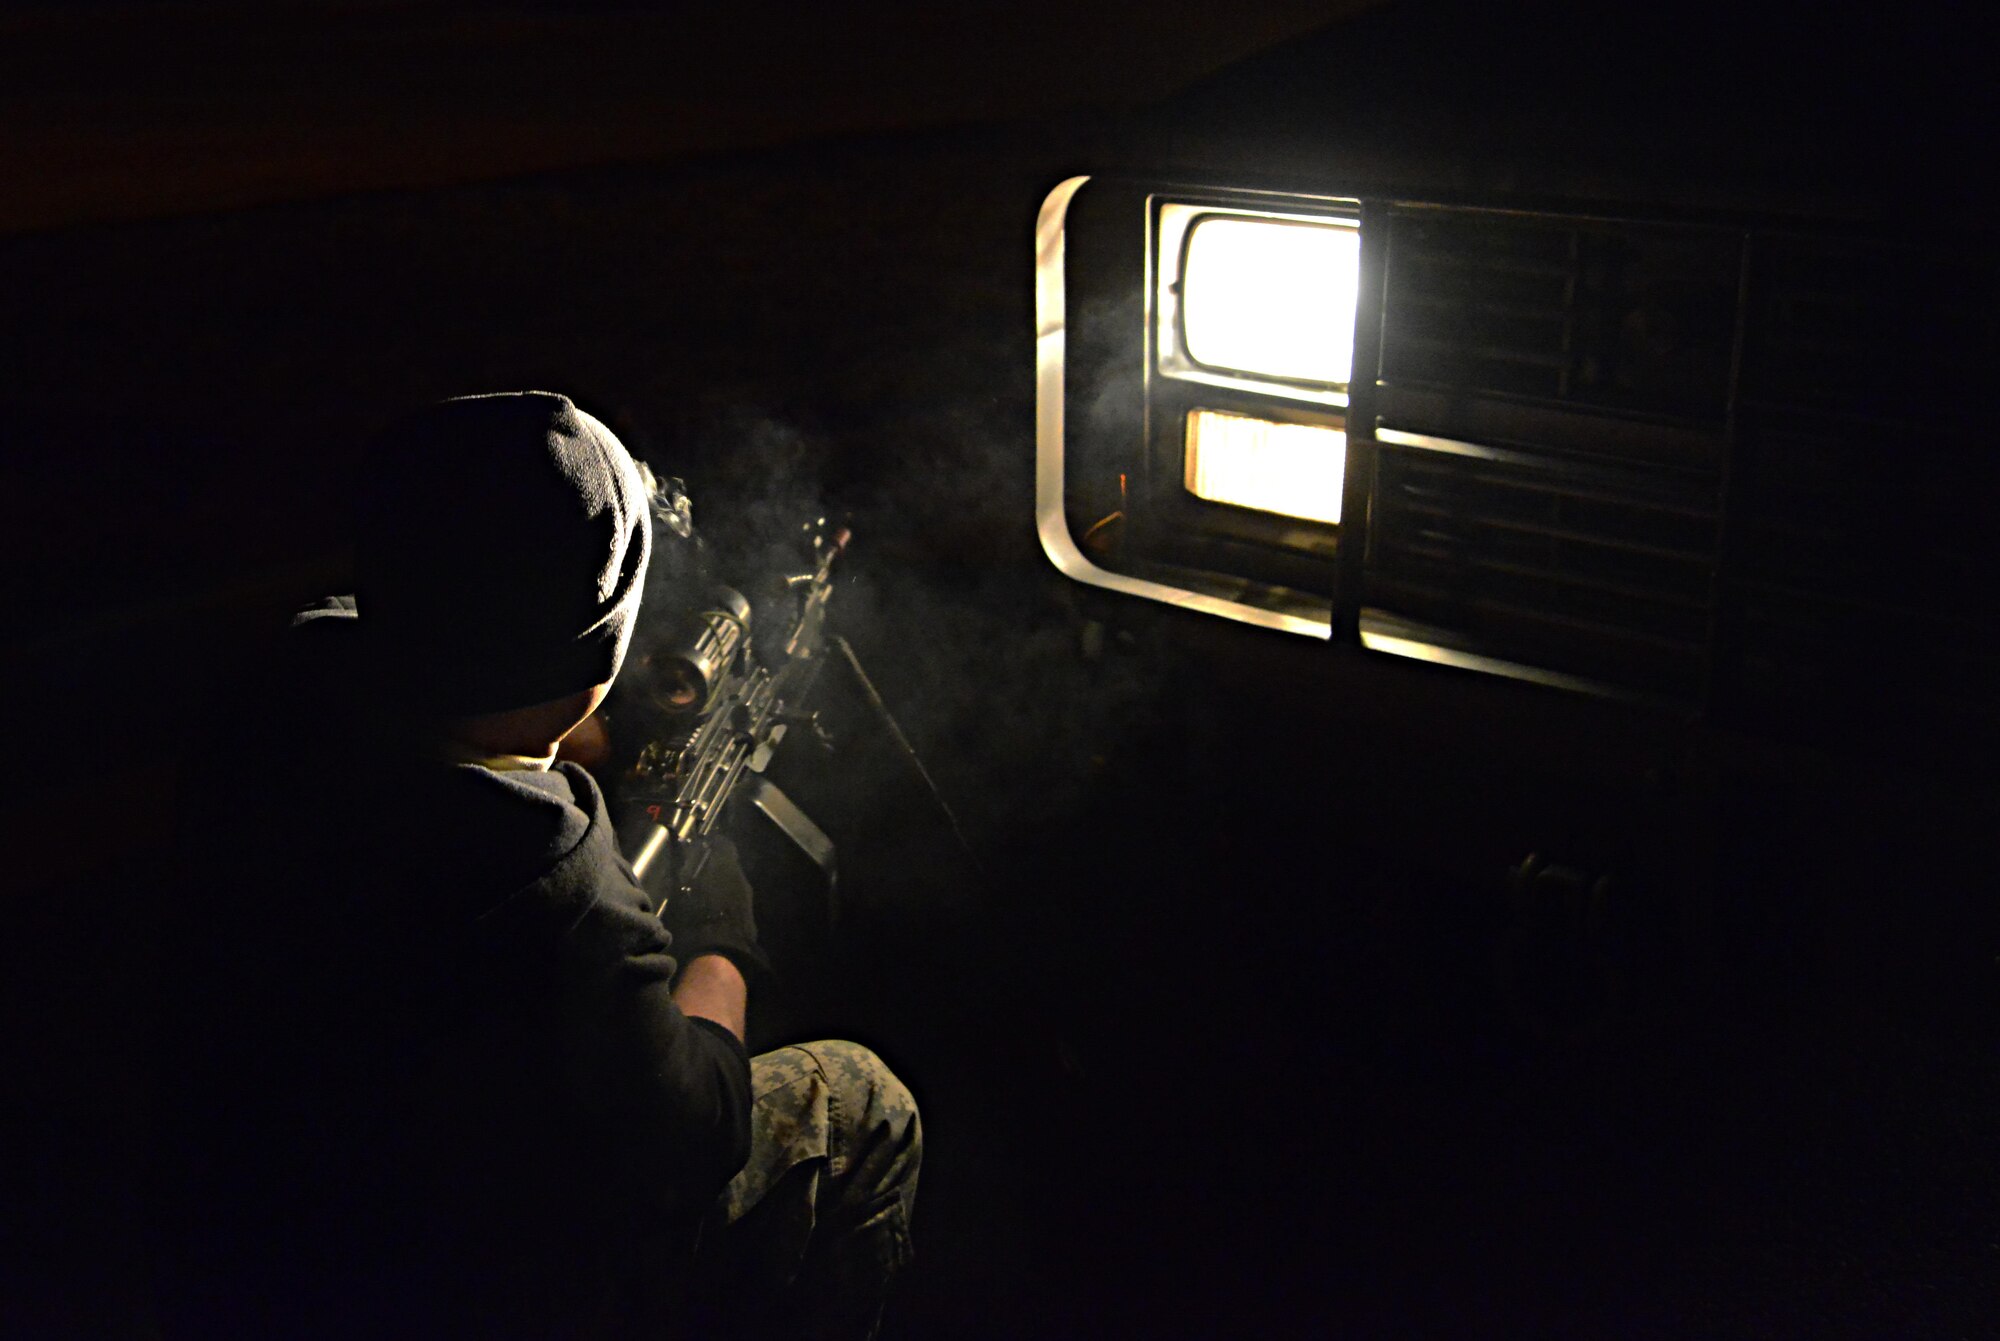 A U.S. Army infantryman acts as opposing forces during readiness exercise Beverly Midnight 16-01, on Osan Air Base, Republic of Korea, March 8, 2016. Beverly Midnight 16-01 provides ROK and U.S. armed forces the opportunity to hone resourceful skills used in the event of real-world contingencies. The 51st Security Forces Squadron utilized Airmen and Soldiers to play opposing forces while teaching them combat skills. (U.S. Air Force photo by Senior Airman Kristin High/Released)